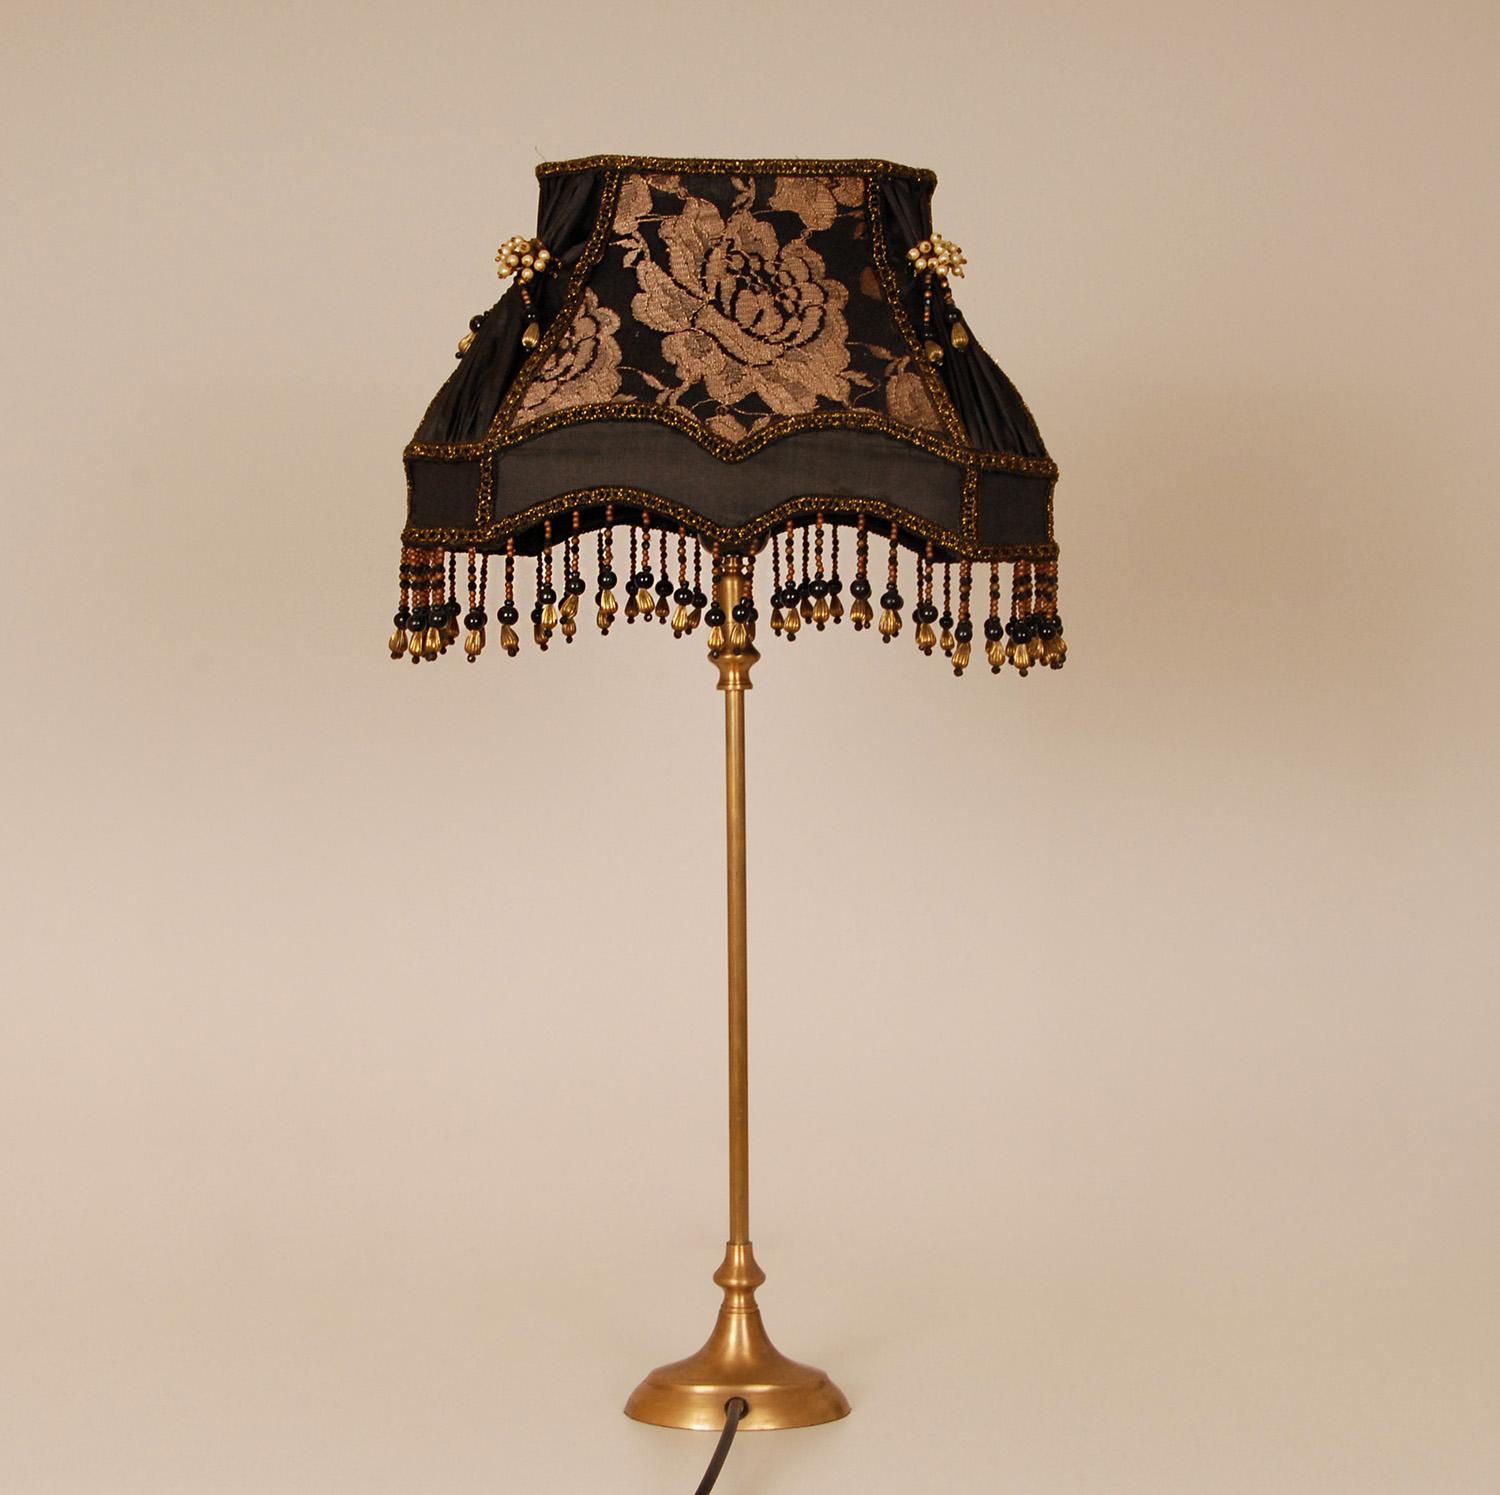 Vintage French Baroque Lamp Fringed Beaded 1970s Gold and Black For Sale 1